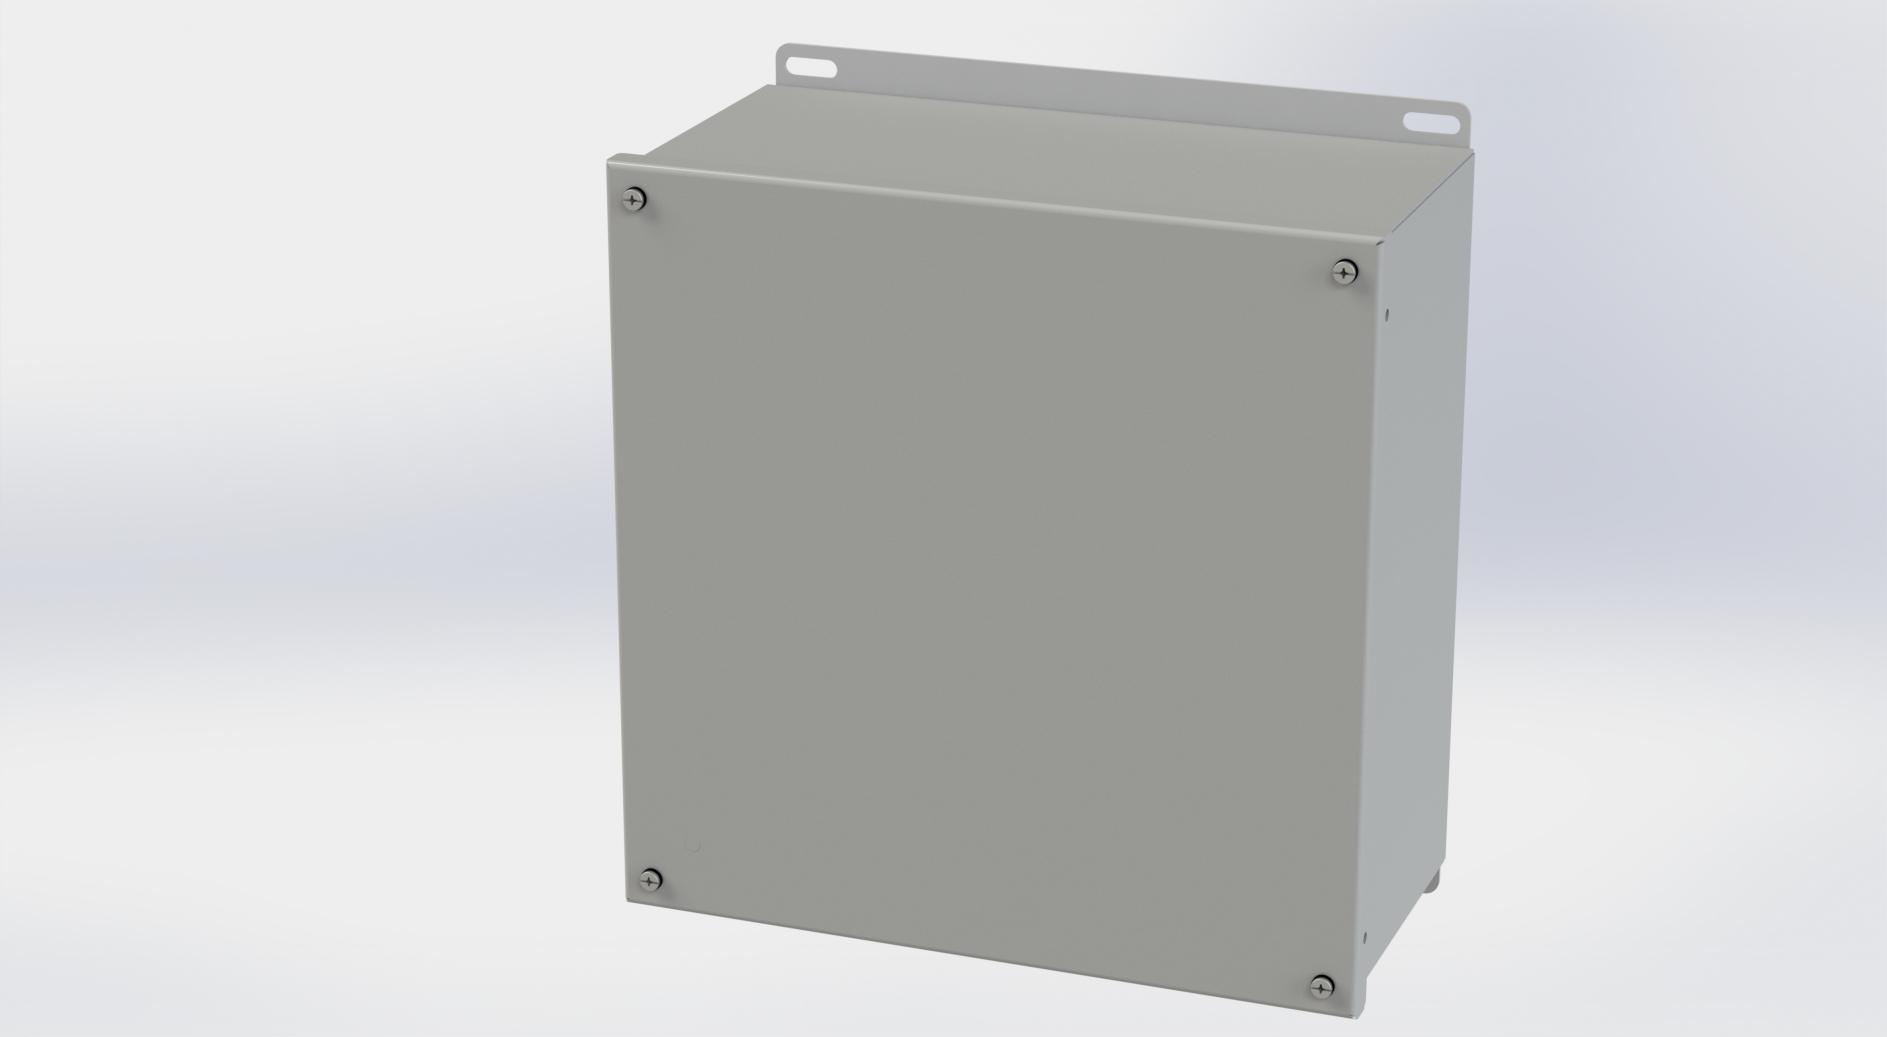 Saginaw Control SCE-1212SC SC Enclosure, Height:12.13", Width:12.00", Depth:6.00", ANSI-61 gray powder coating inside and out.  Optional sub-panels are powder coated white.